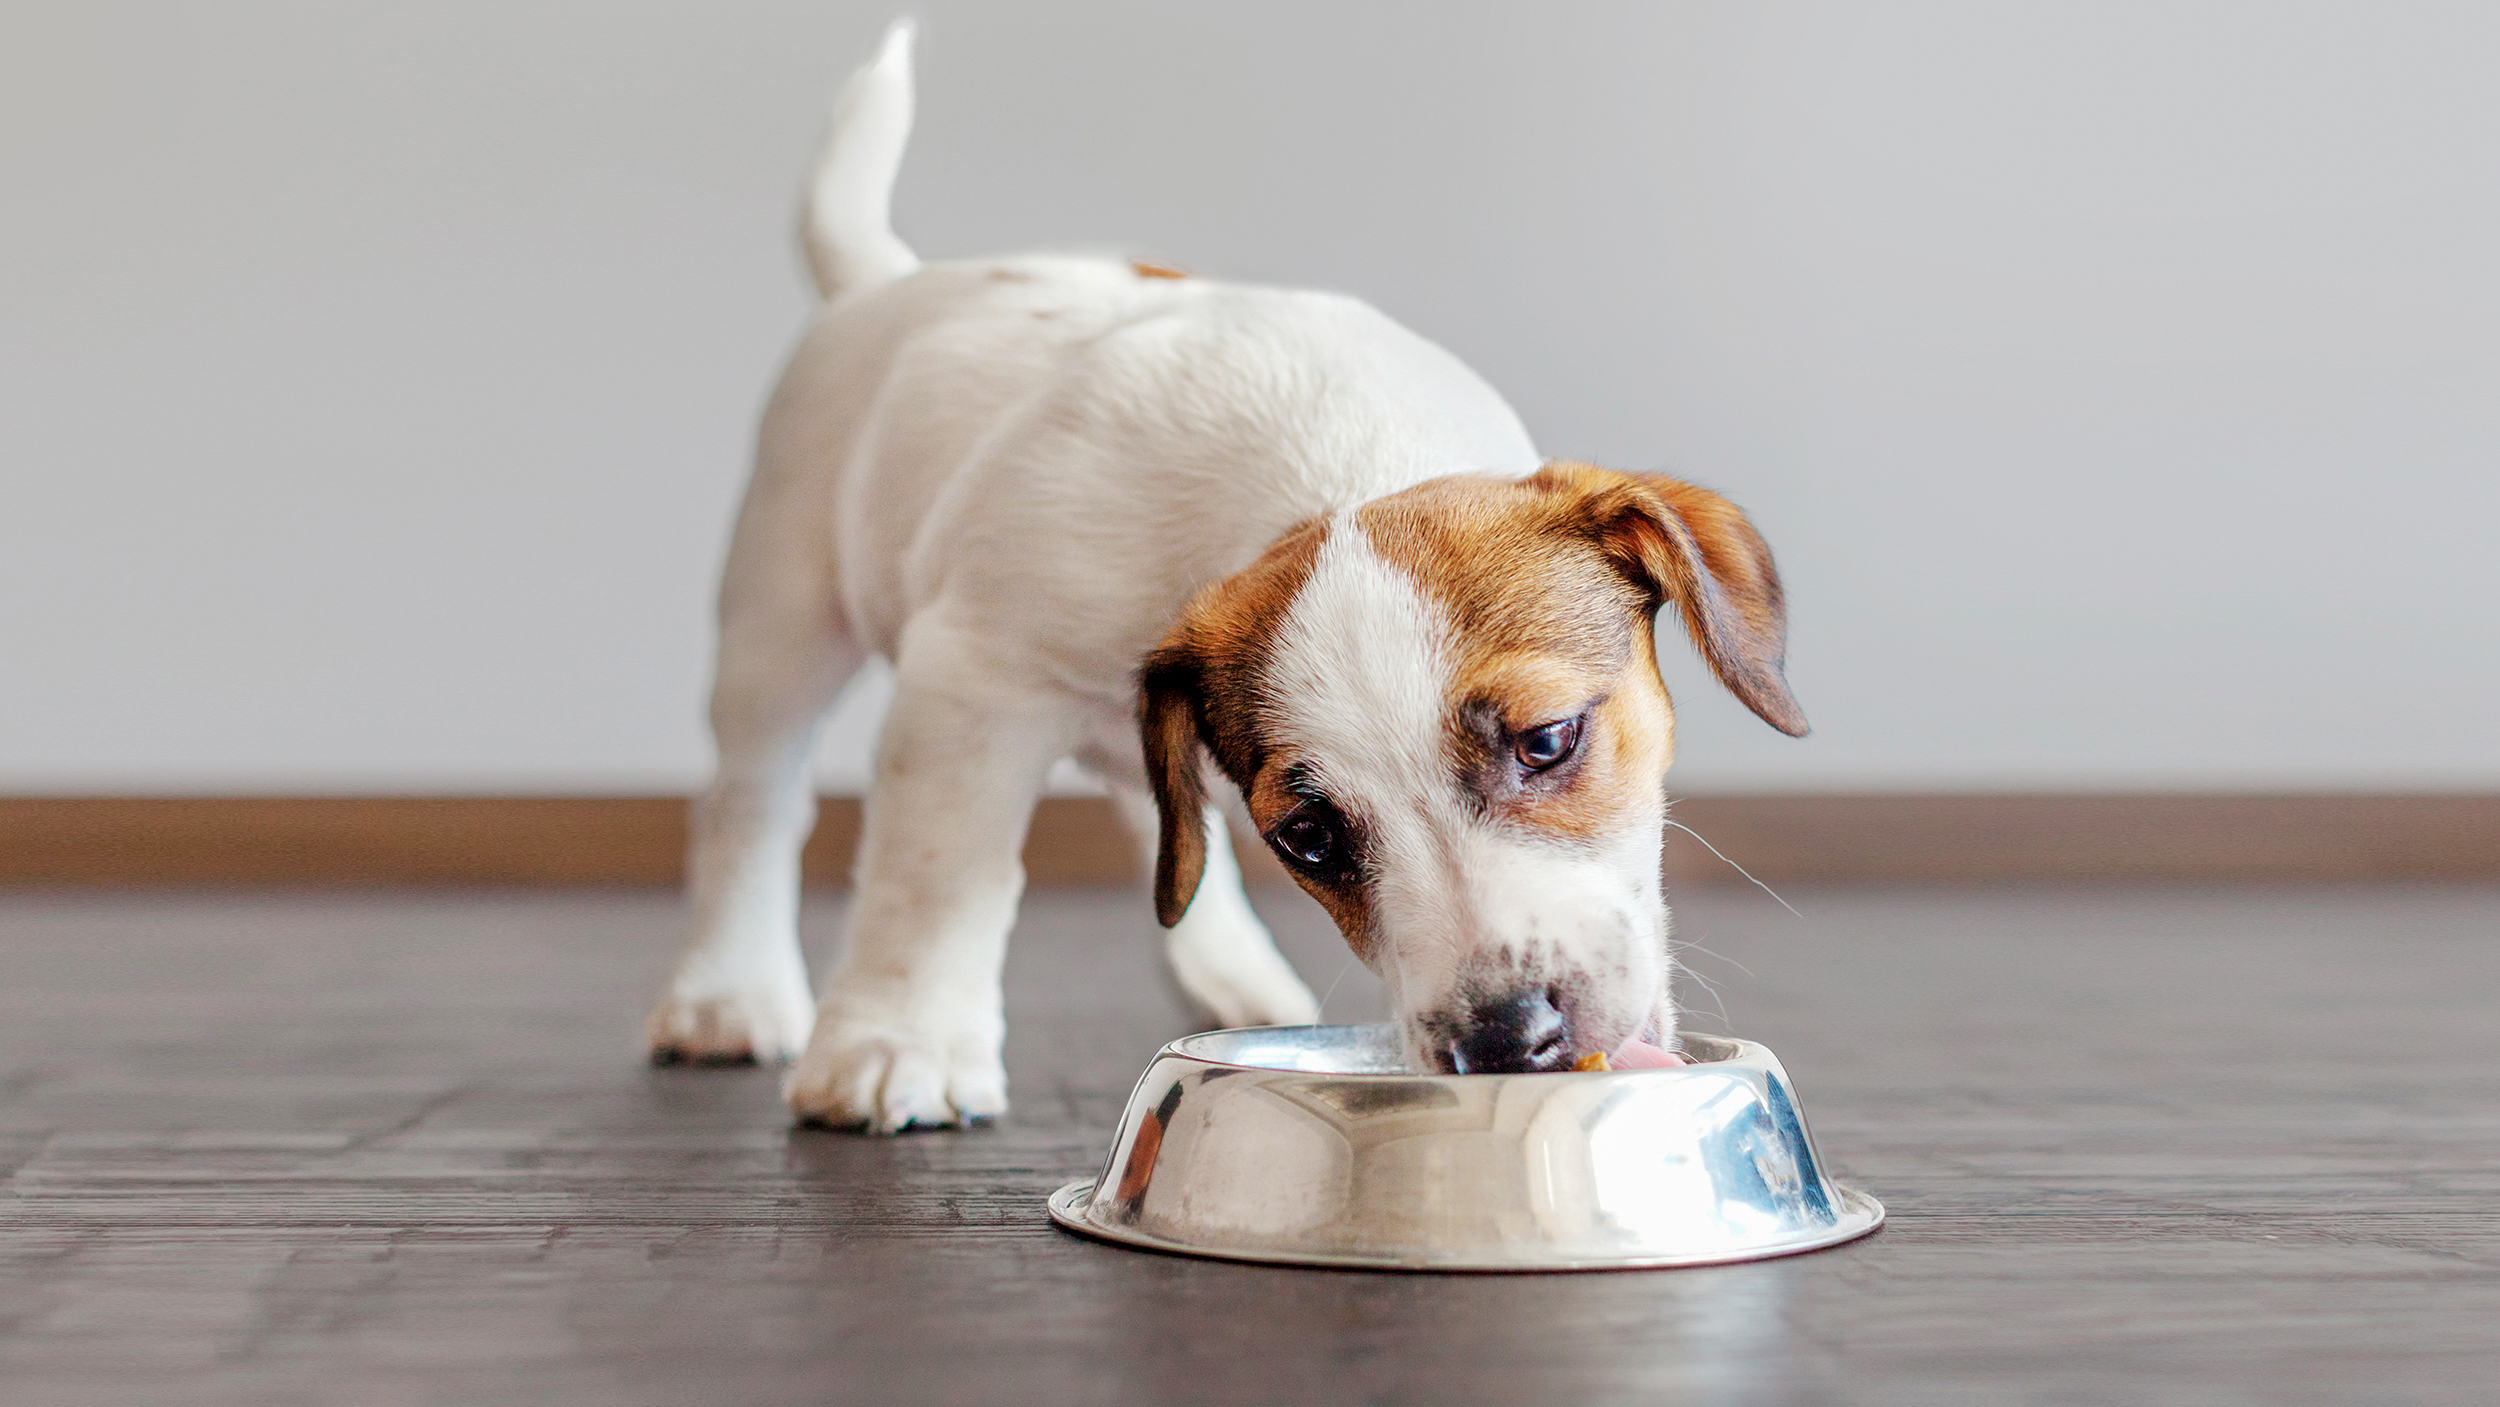 Puppy Jack Russell standing indoors eating from a silver bowl.